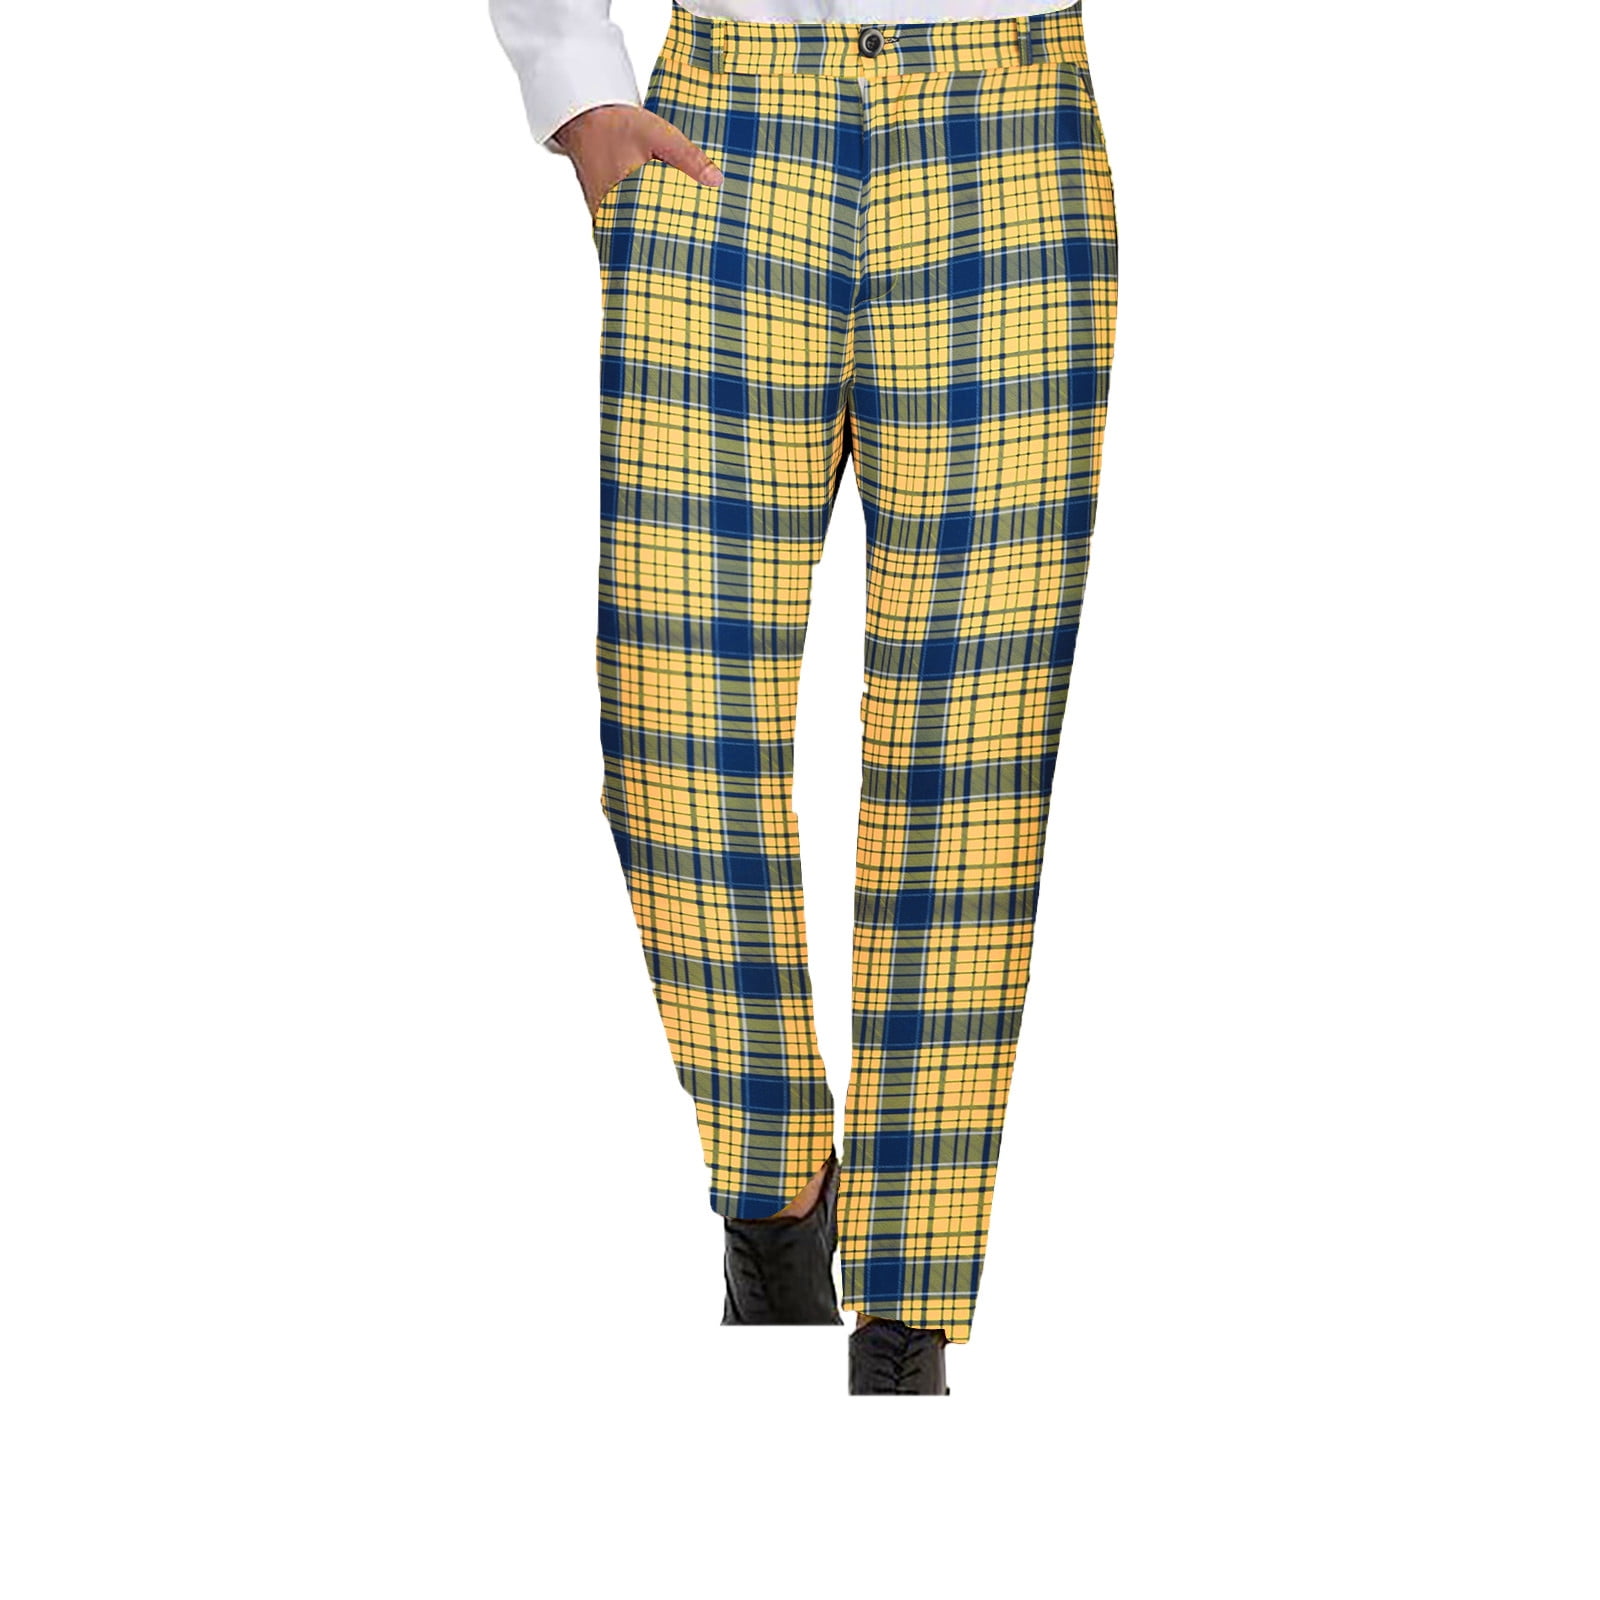 Tangerine Tartan Pants With Free Multitool  Delivery  Plaid Tartan  Designed in Scotland By Royal  Awesome